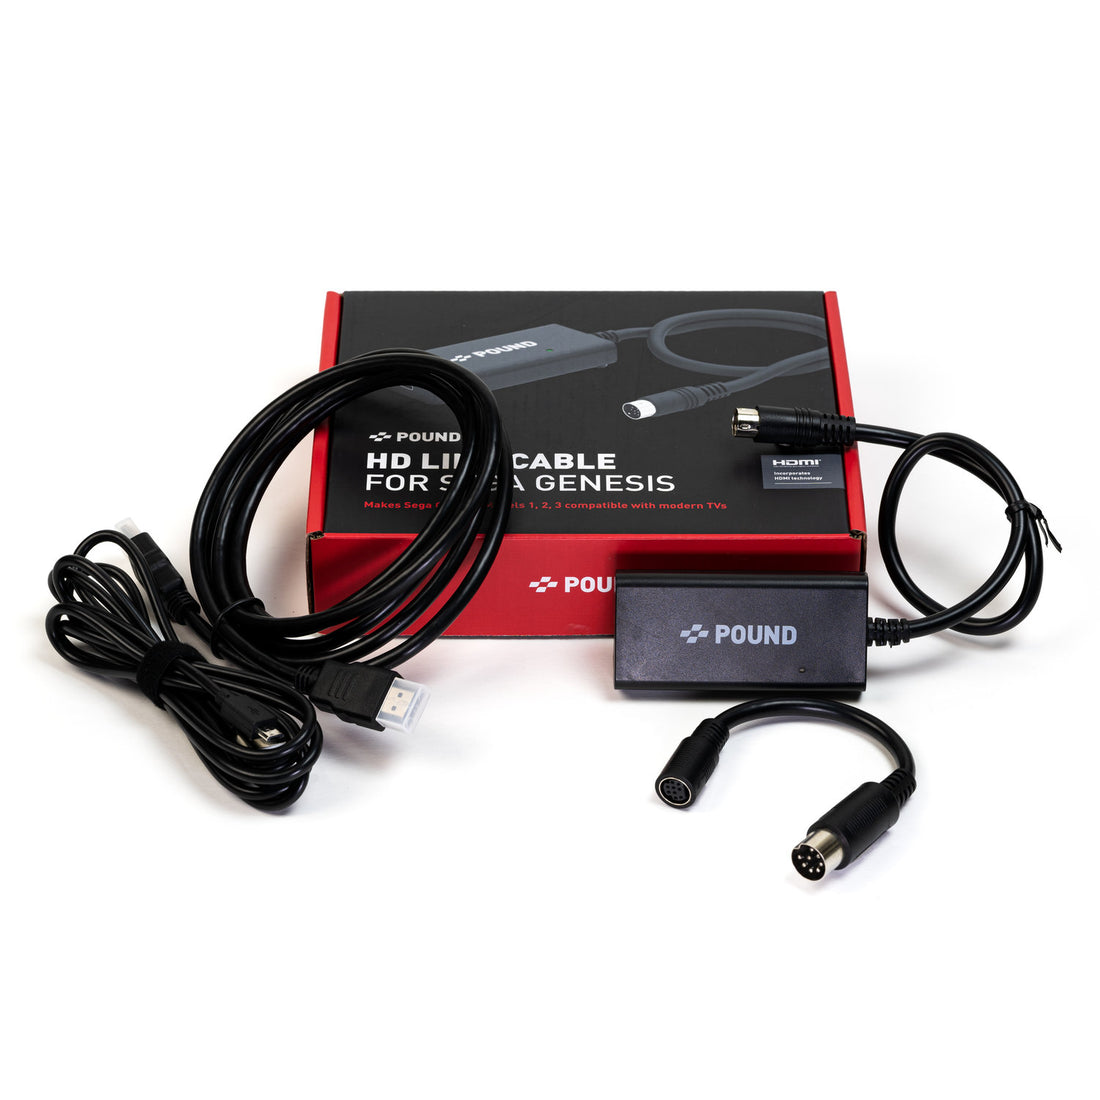 HDMI solution for Megadrive now available